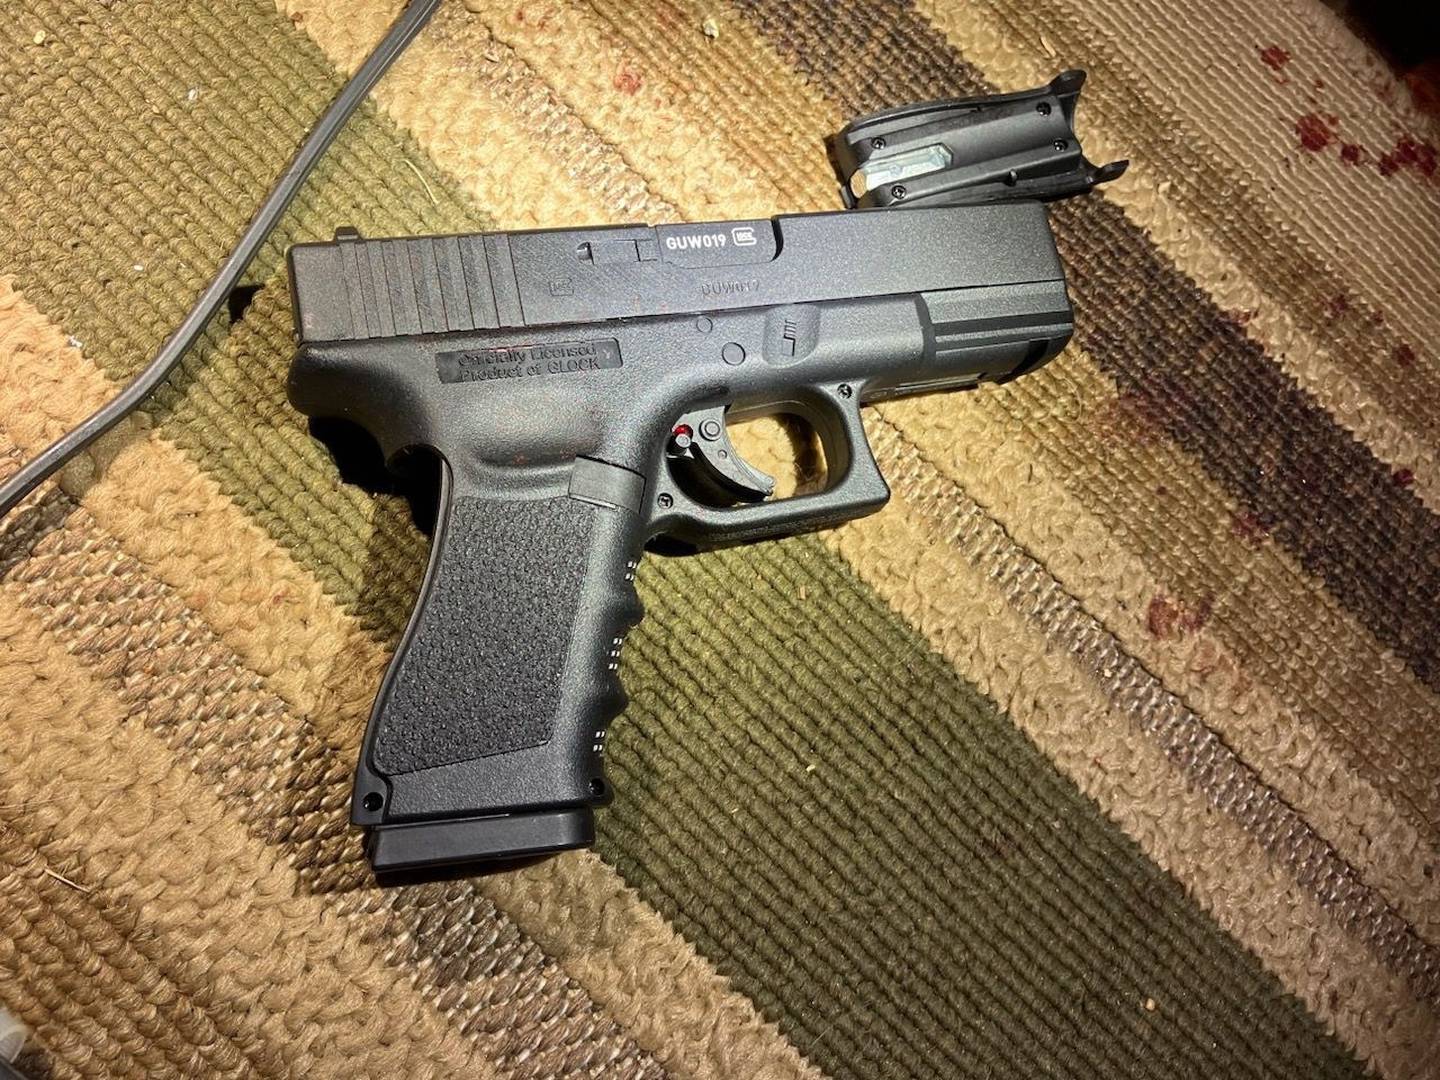 The suspect from Wednesday's officer involved shooting, Vincent Palmero, was in possession of what JSO detectives later determined to be an airsoft handgun.